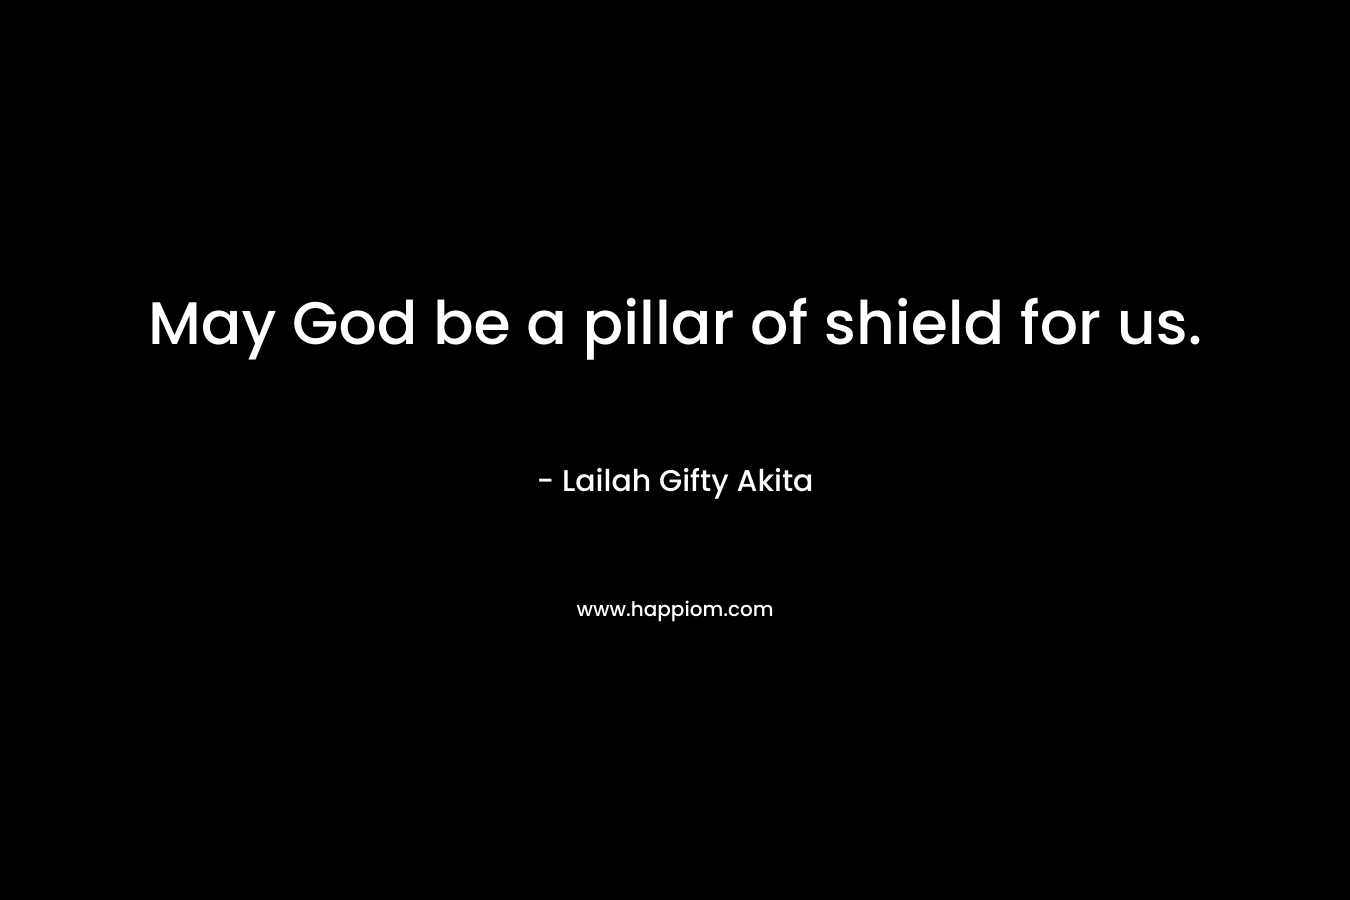 May God be a pillar of shield for us.